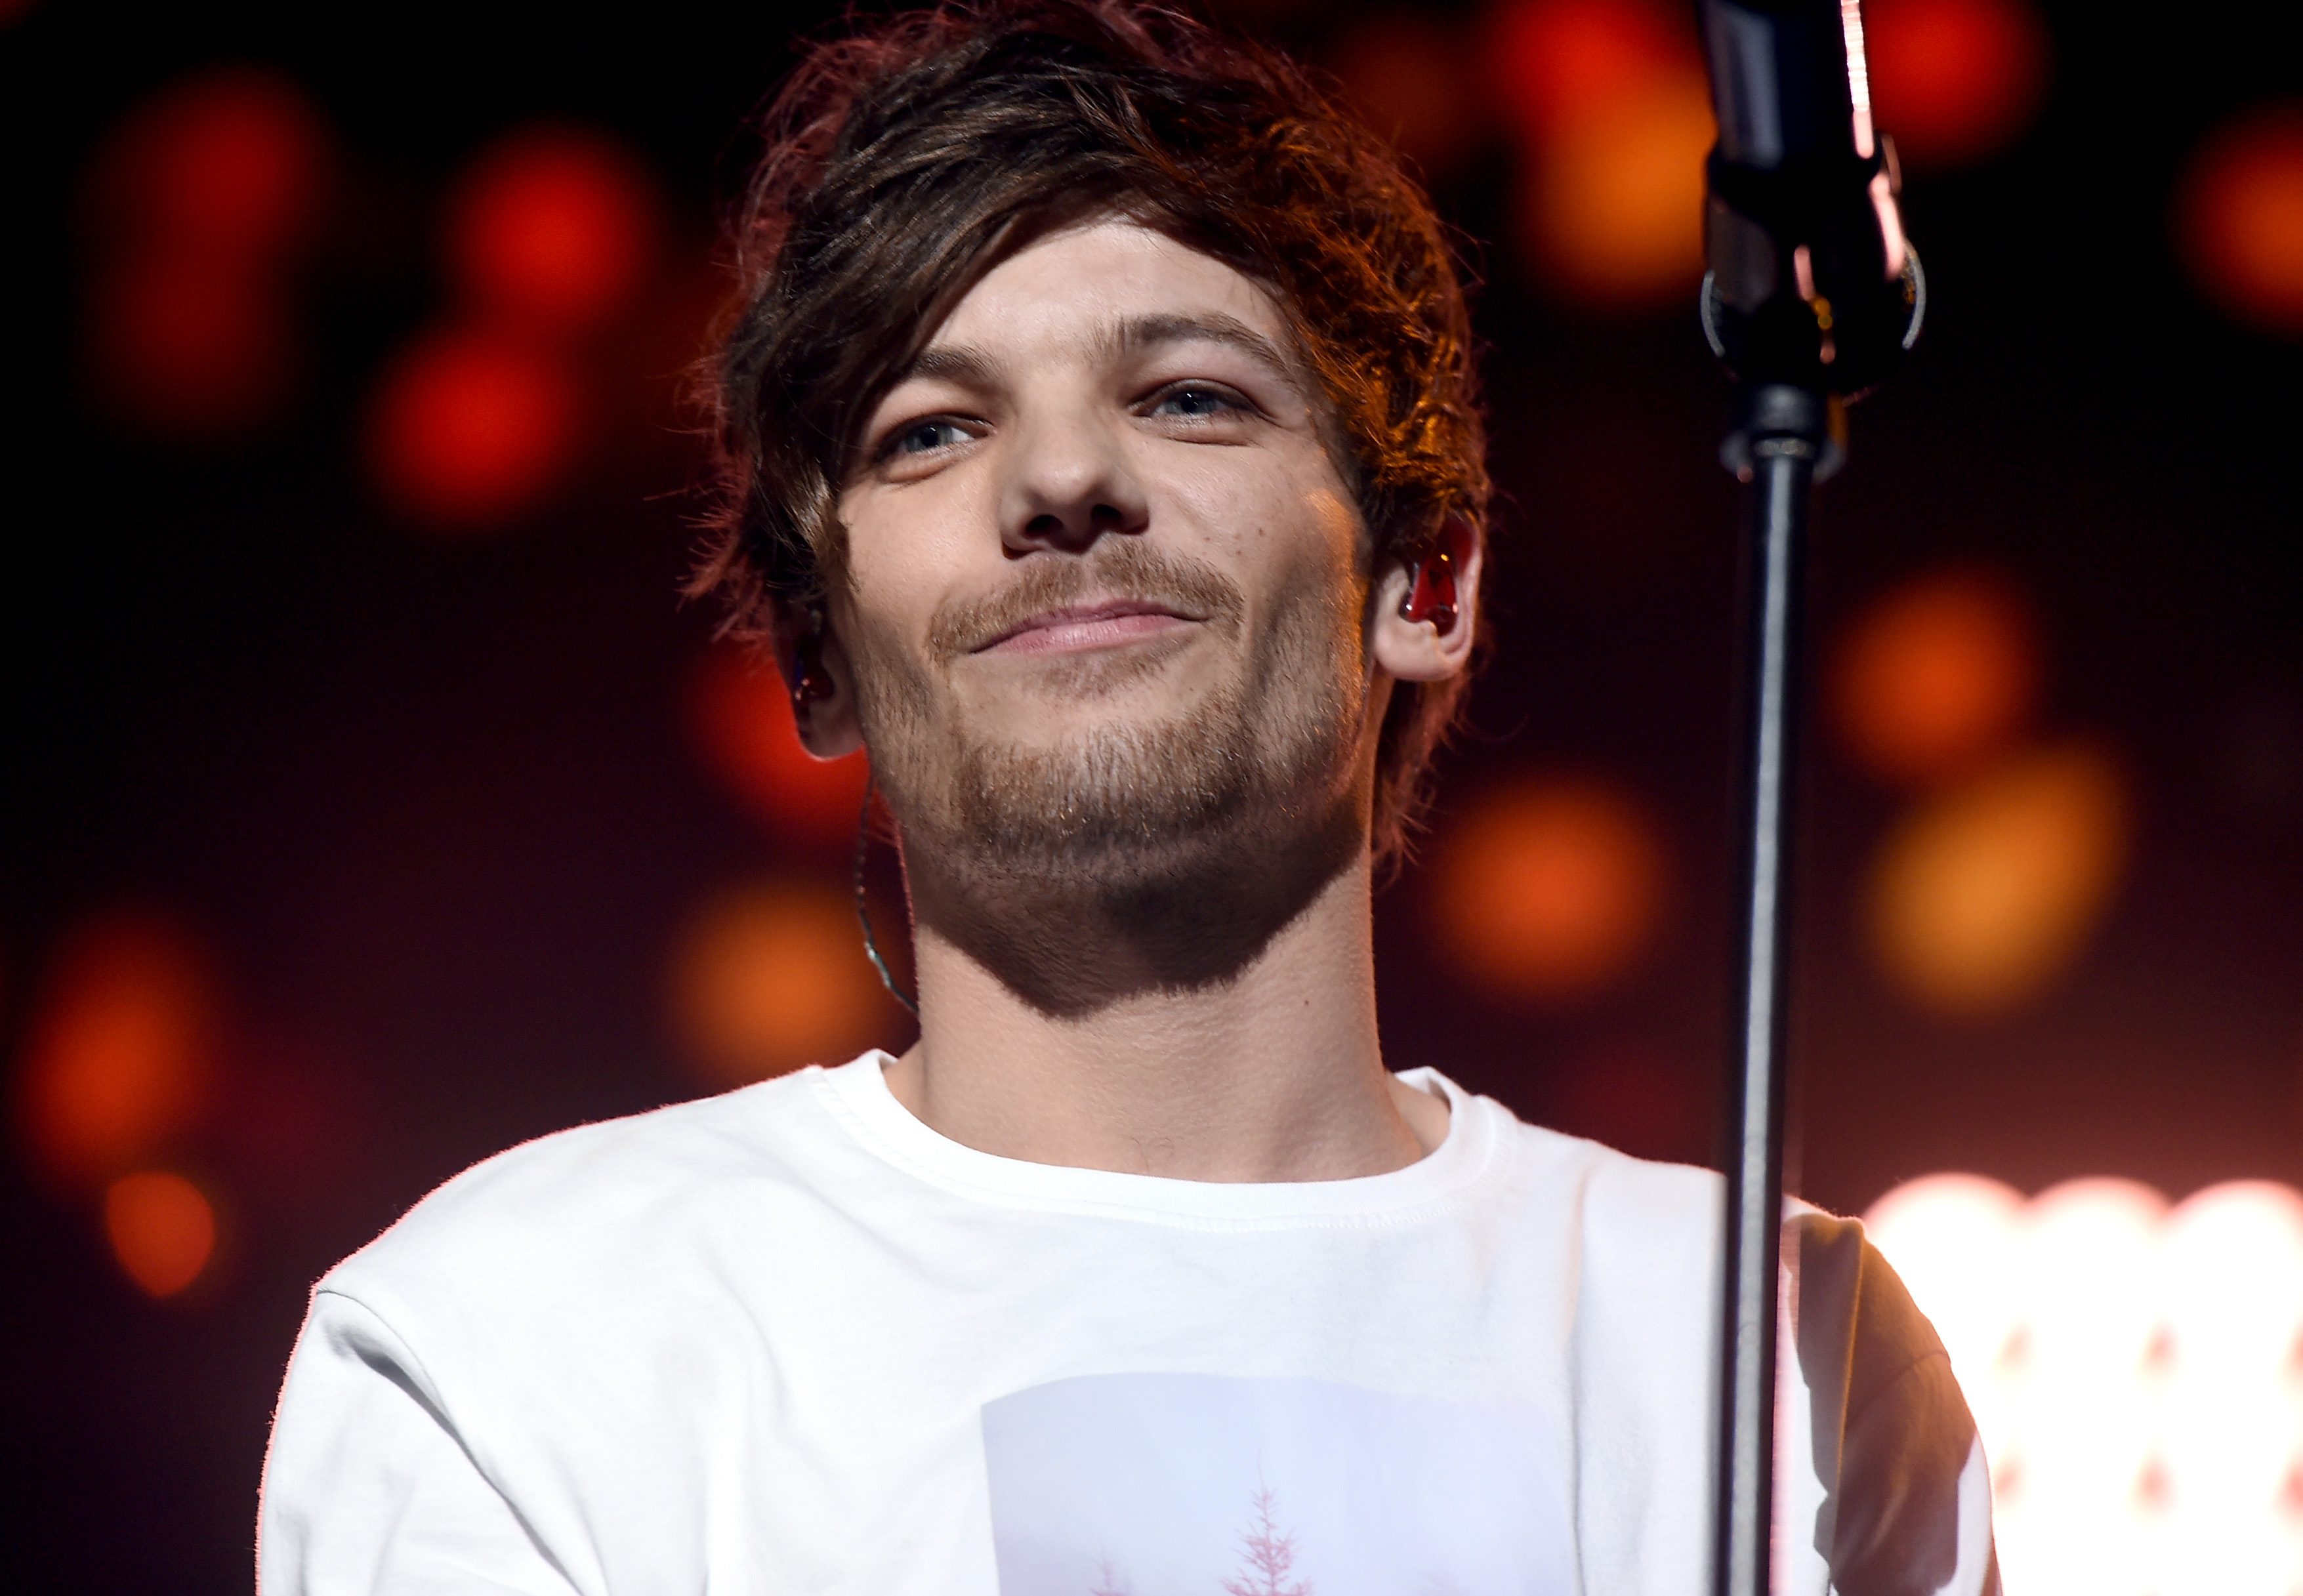 Louis Tomlinson of One Direction in Dallas, TX, on Dec. 1, 2015. (Kevin Winter—Getty Images)